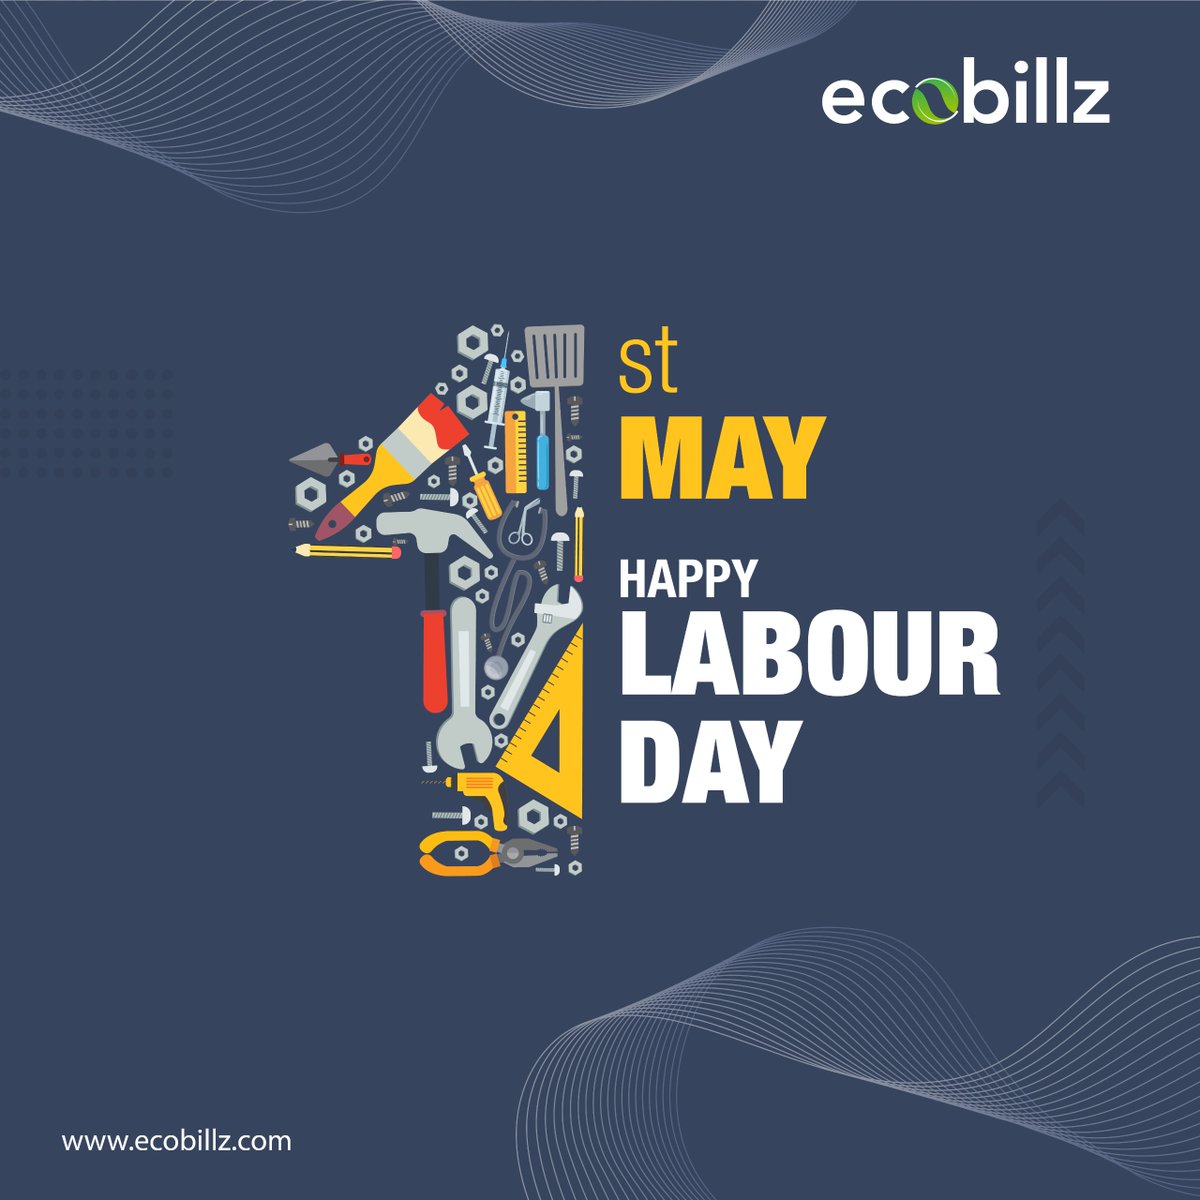 Lets be grateful to all the hard work that each one puts to build a better nation!!! #labourday #may1st #workhard #buildstrong #grateful #gratitude #automation #automationsolution #hospitality #retail #hospitalitytech #hospitalitytechnology